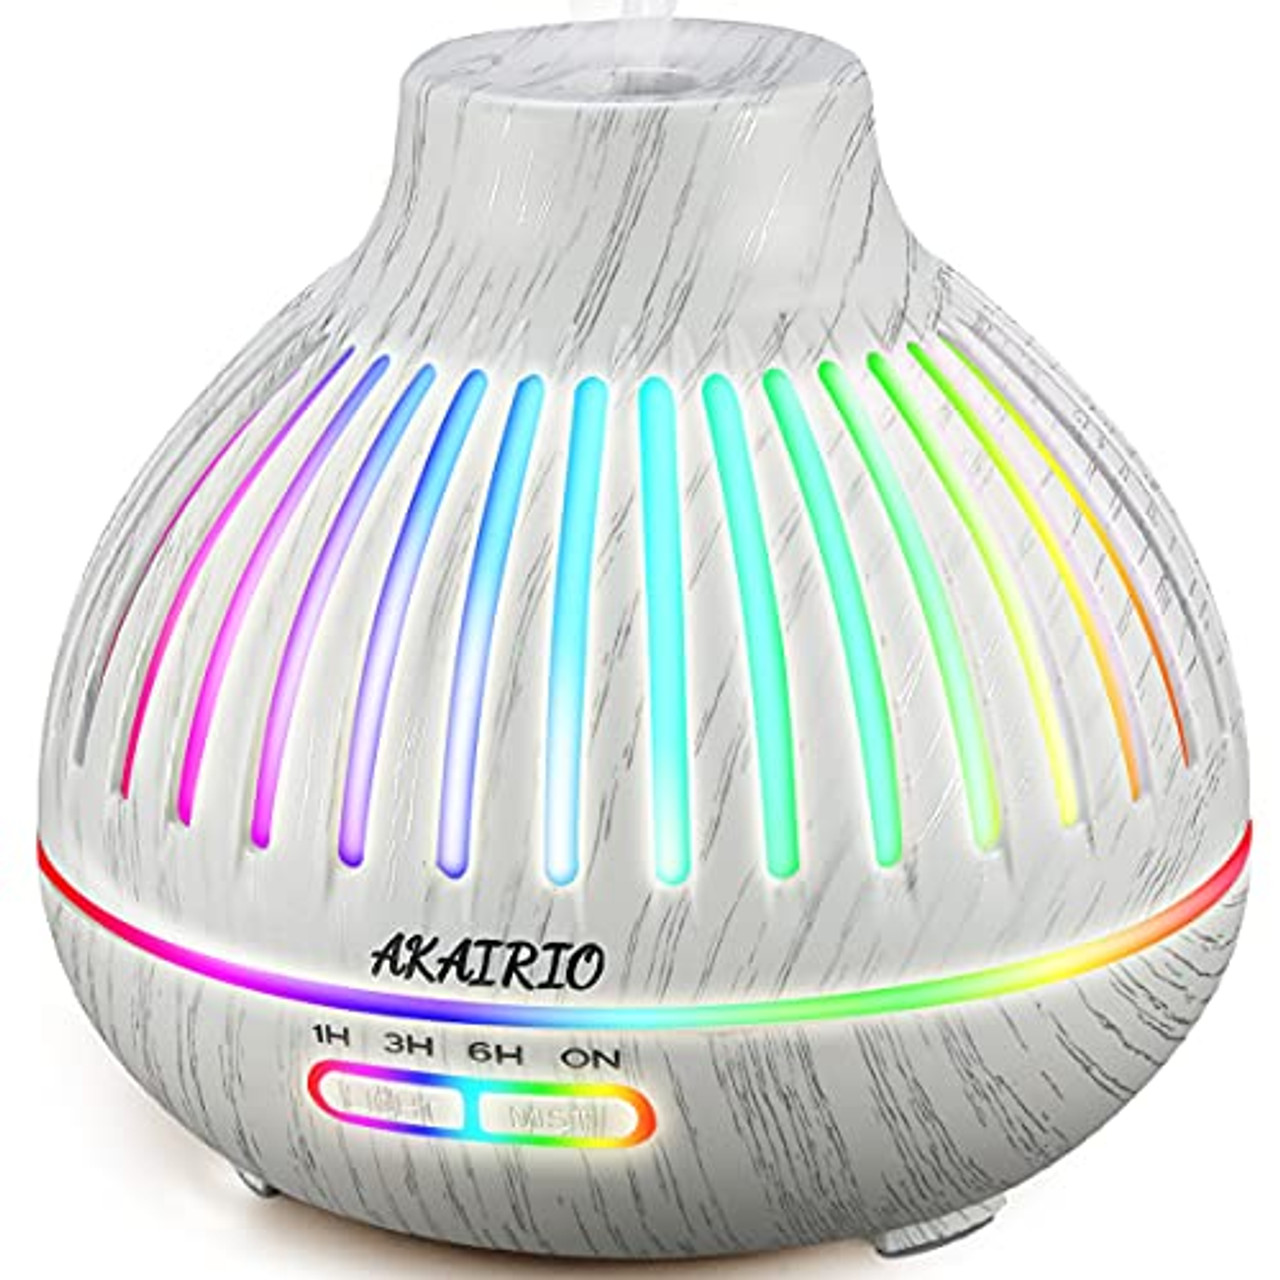  400ML Essential Oil Diffusers for Home Office with Soft  Light,Aromatherapy Diffusers for Essential Oils Large Room Waterless Auto  Off,Aroma Cool Mist Humidifiers Diffuser Bedroom Kids 4 Timer Settings :  Health 